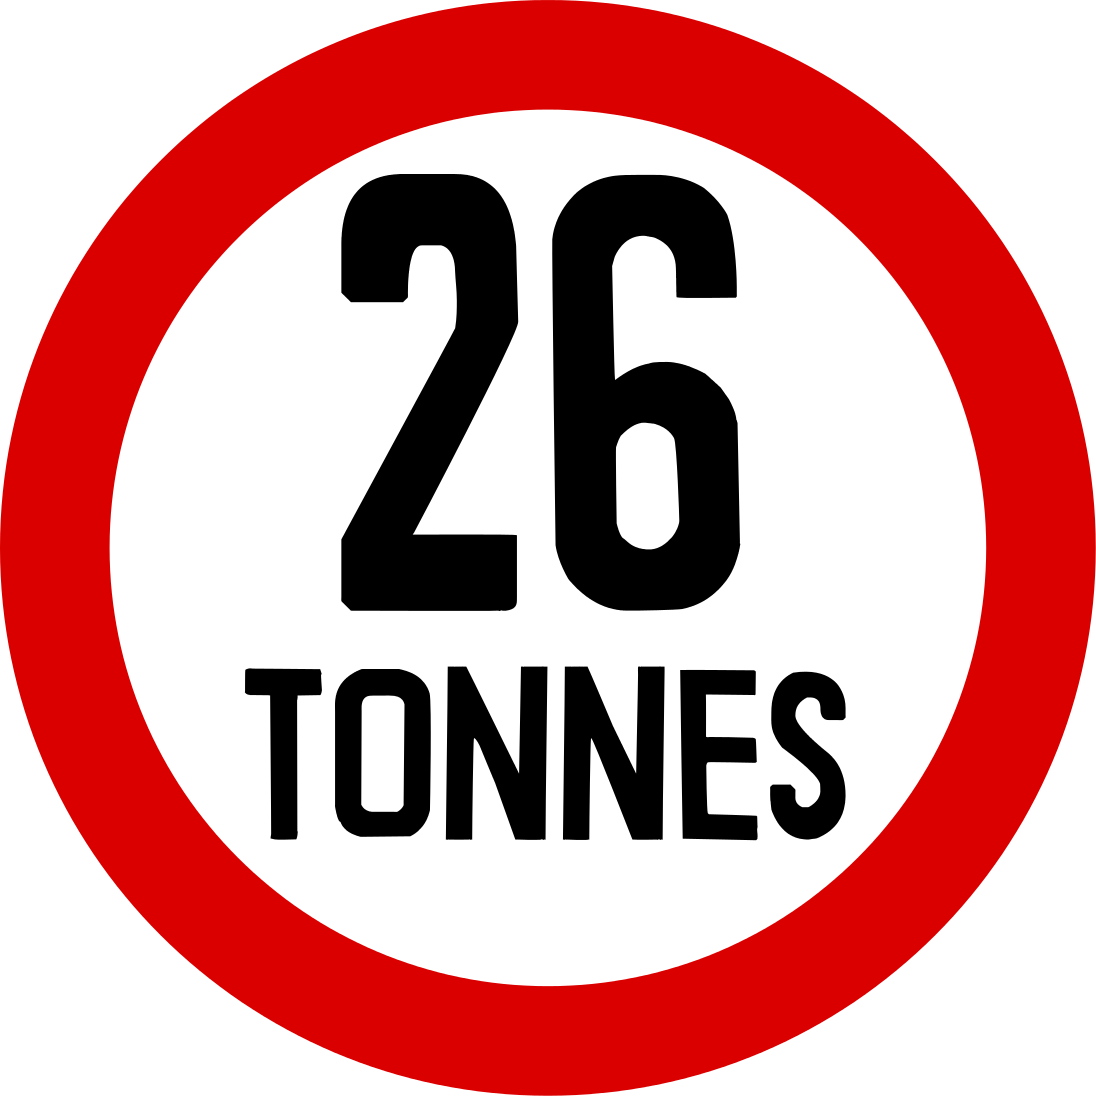 No vehicles over weight shown